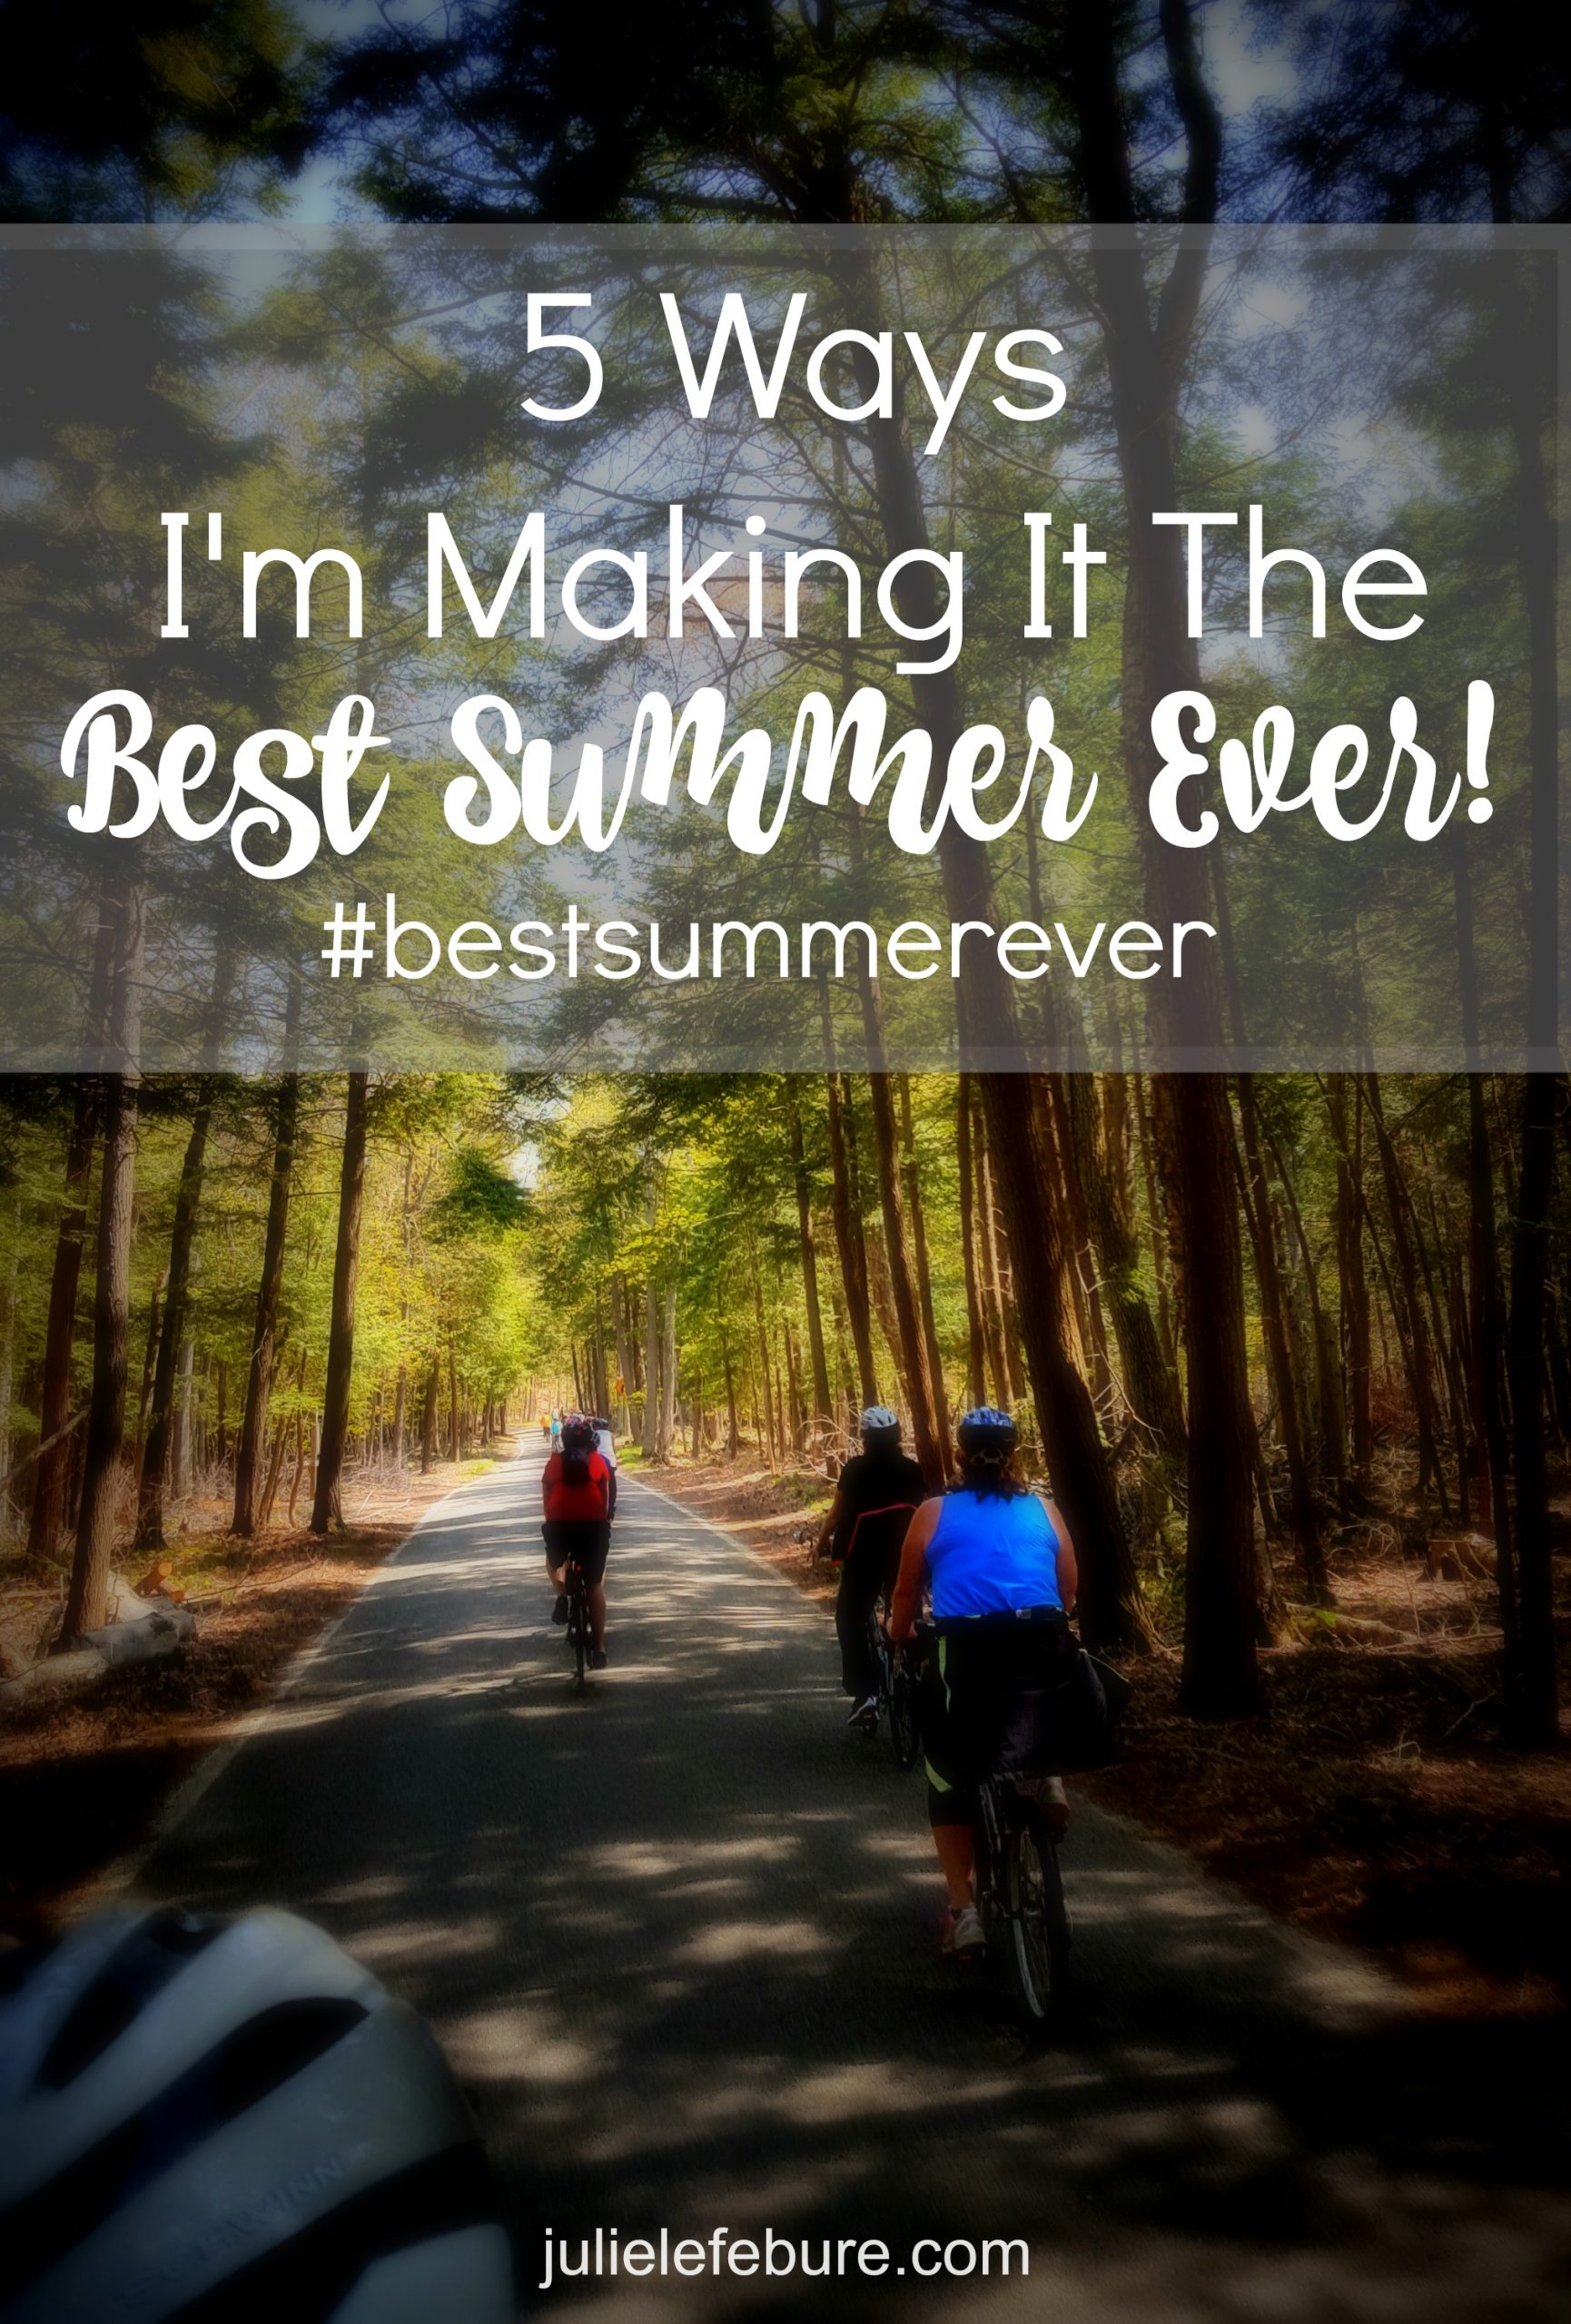 5 Ways I’m Making It The Best Summer Ever